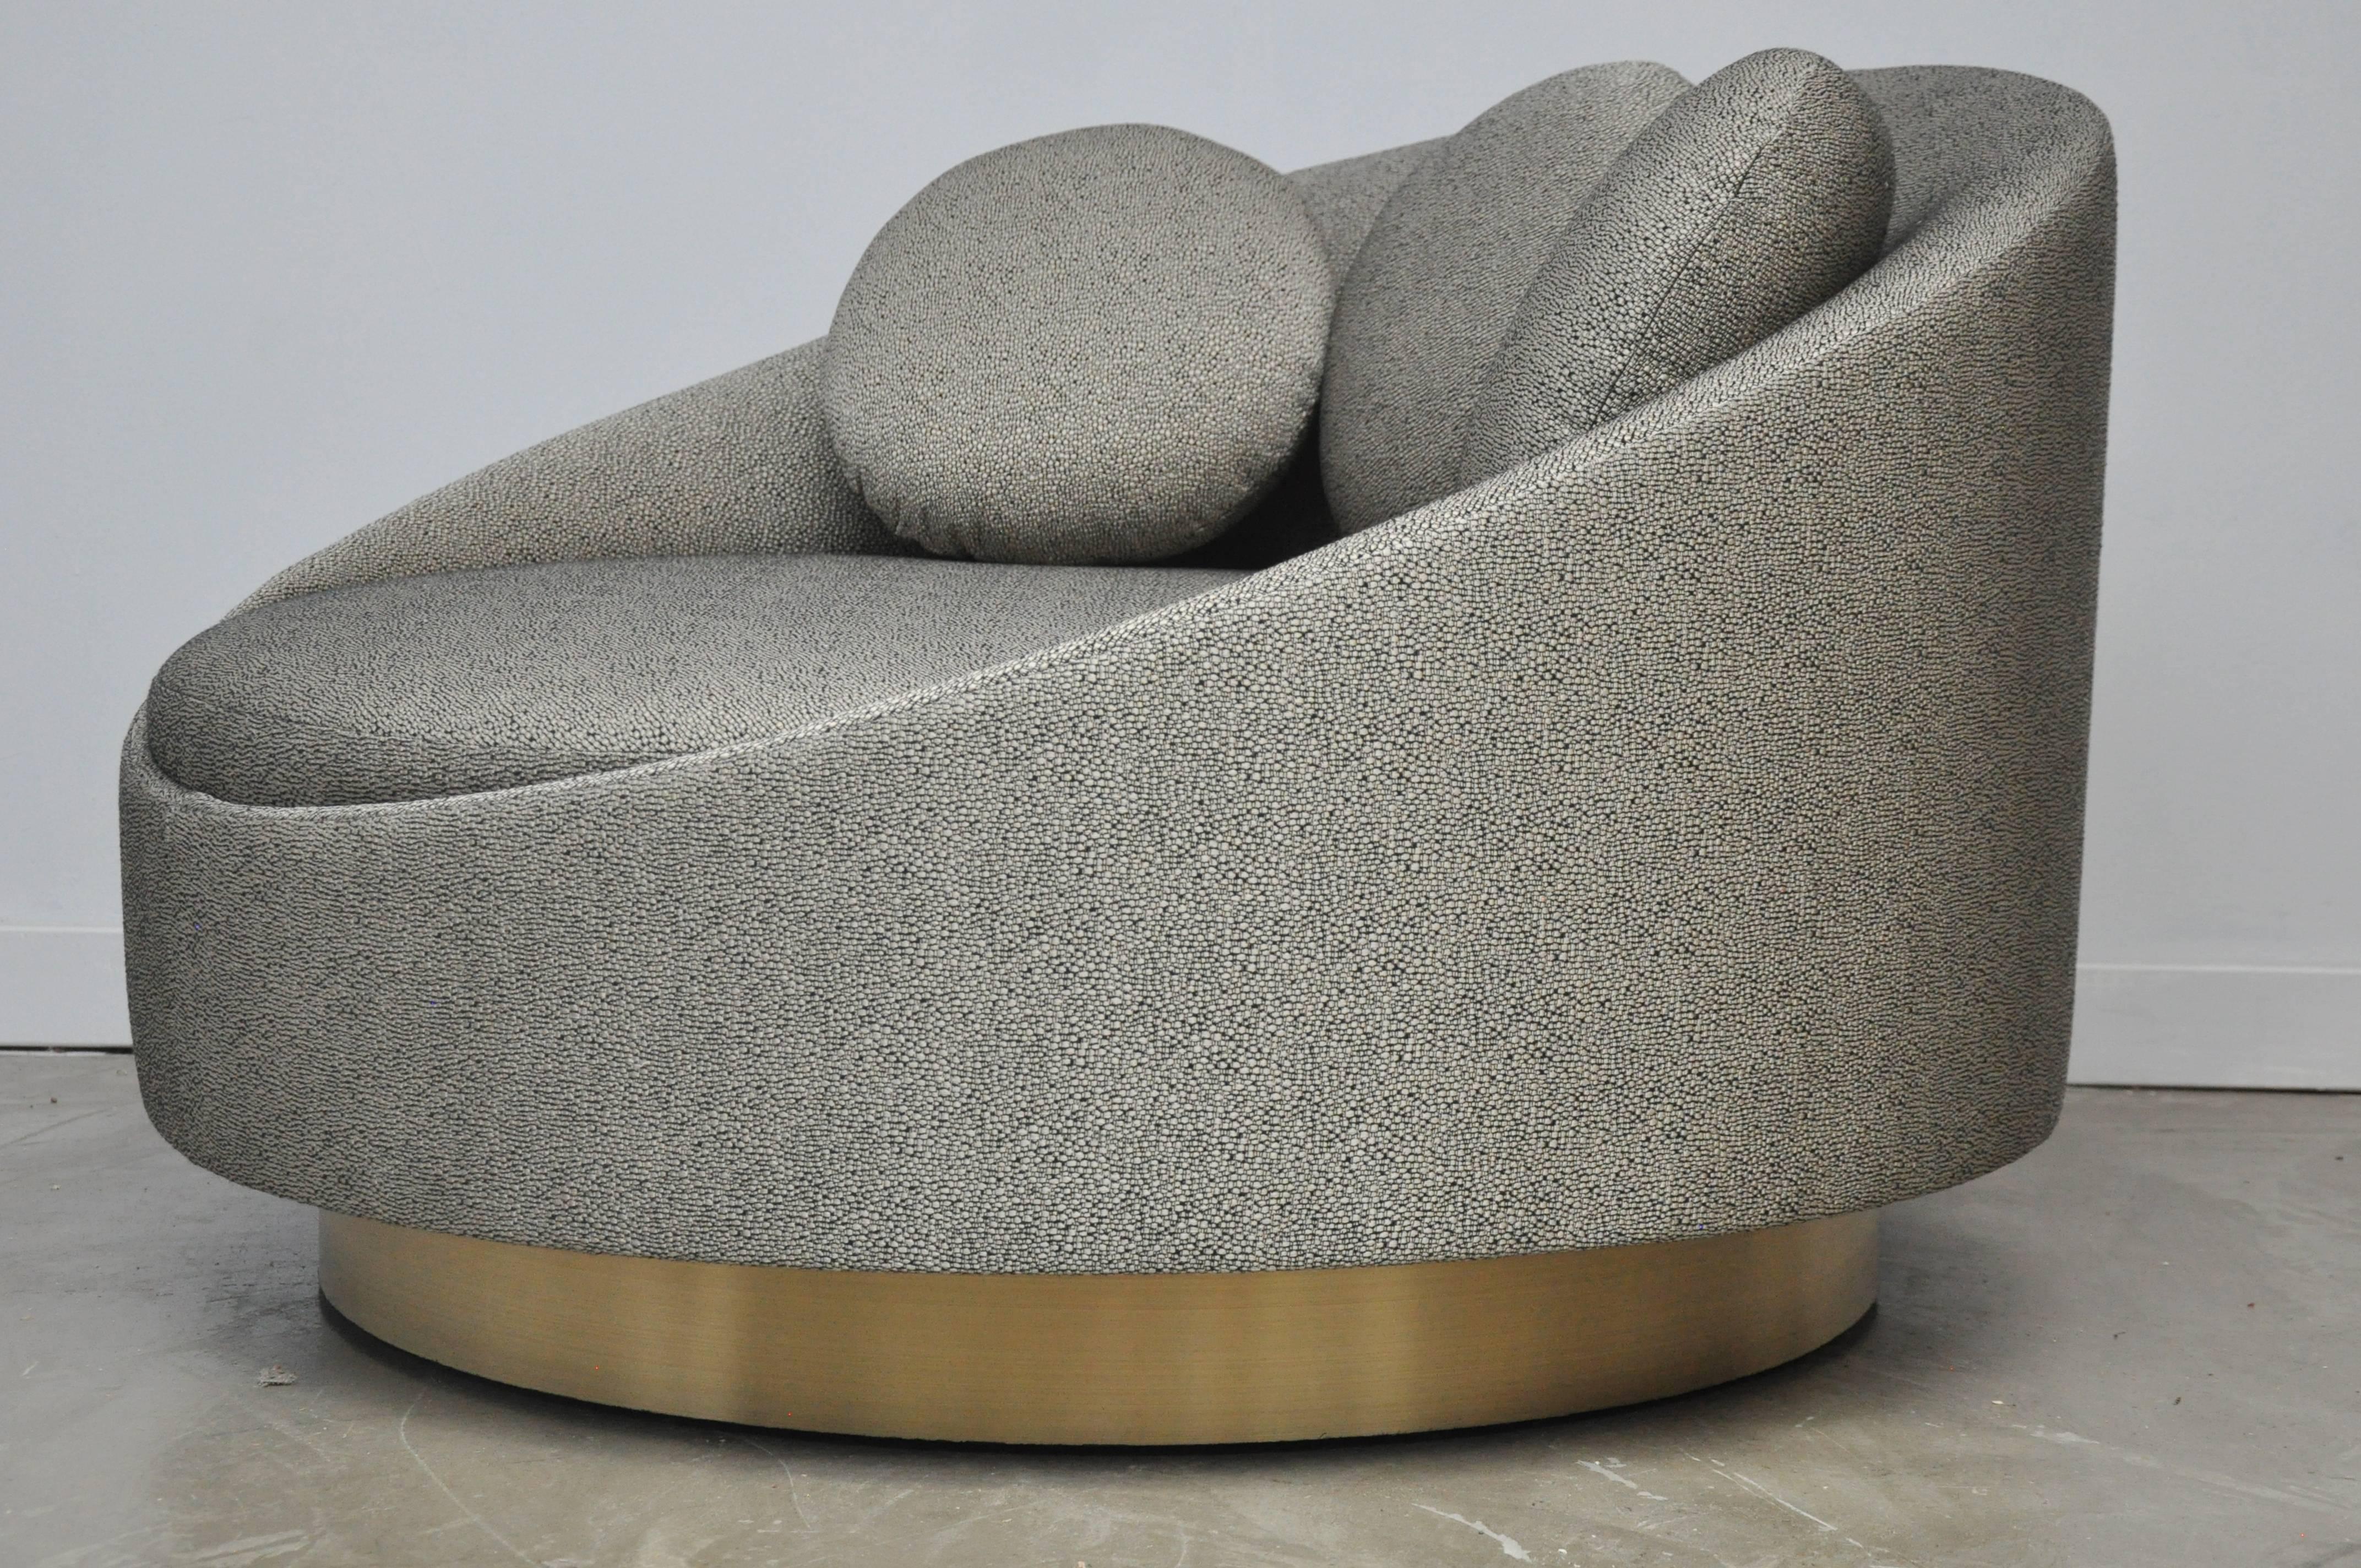 Oversized cuddle swivel chair by Adrian Pearsall. Fully restored. Brushed brass base with new black and gold upholstery.